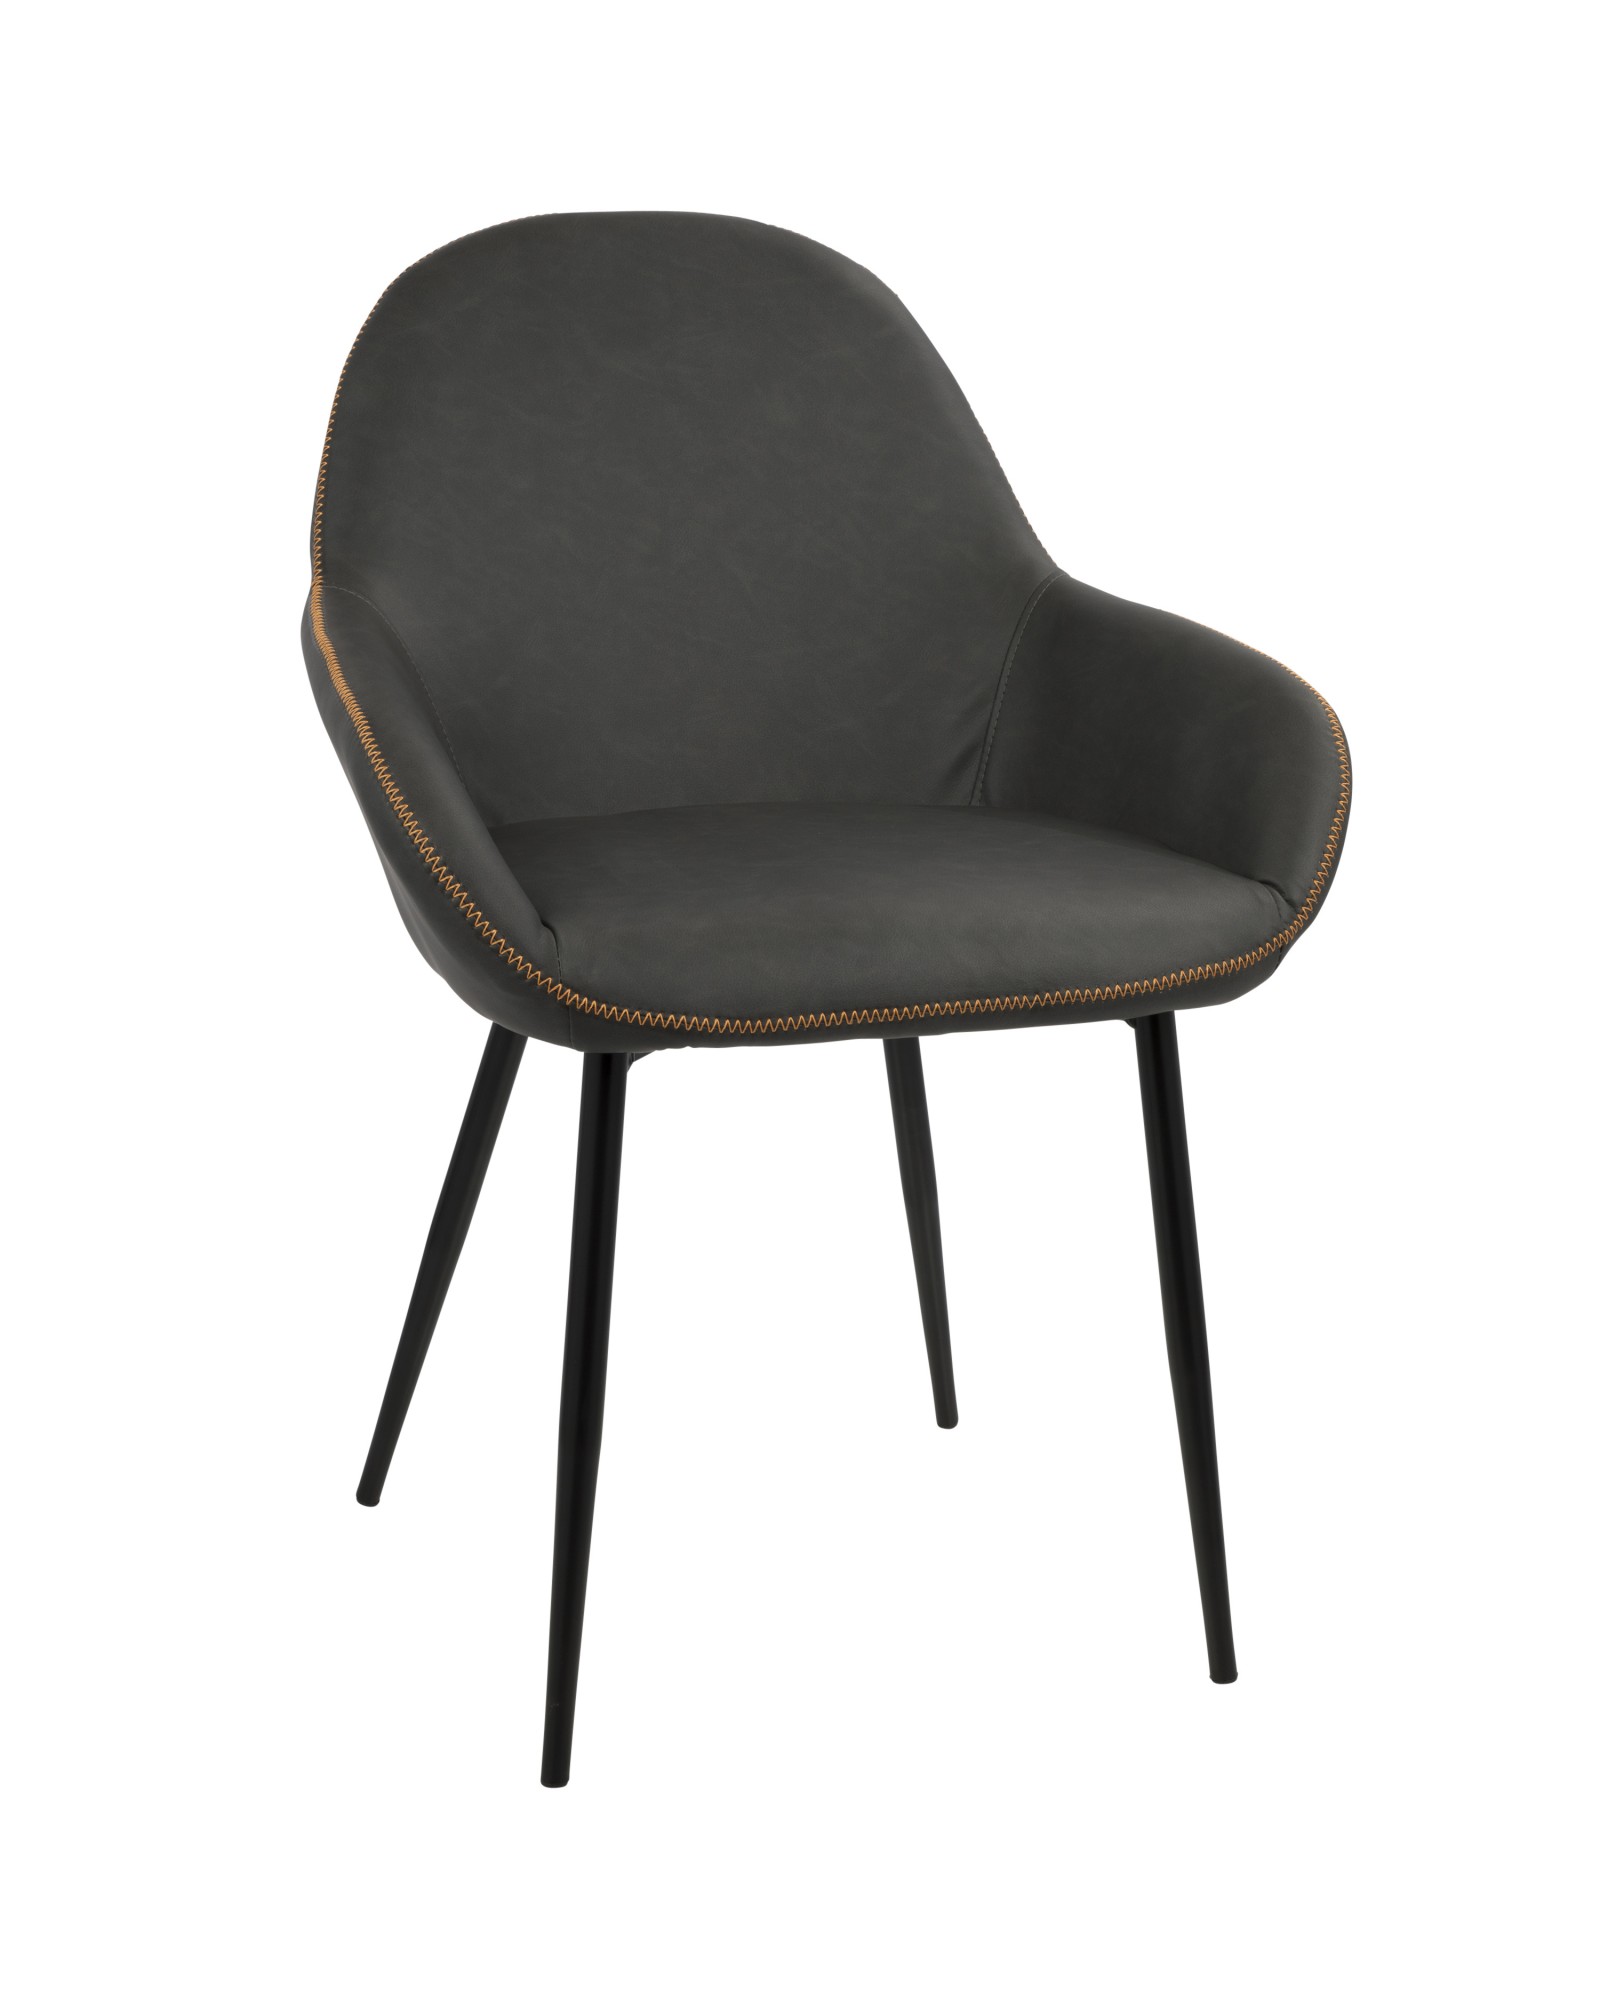 Clubhouse Contemporary Dining Chair in Black with Grey Vintage Faux Leather - Set of 2